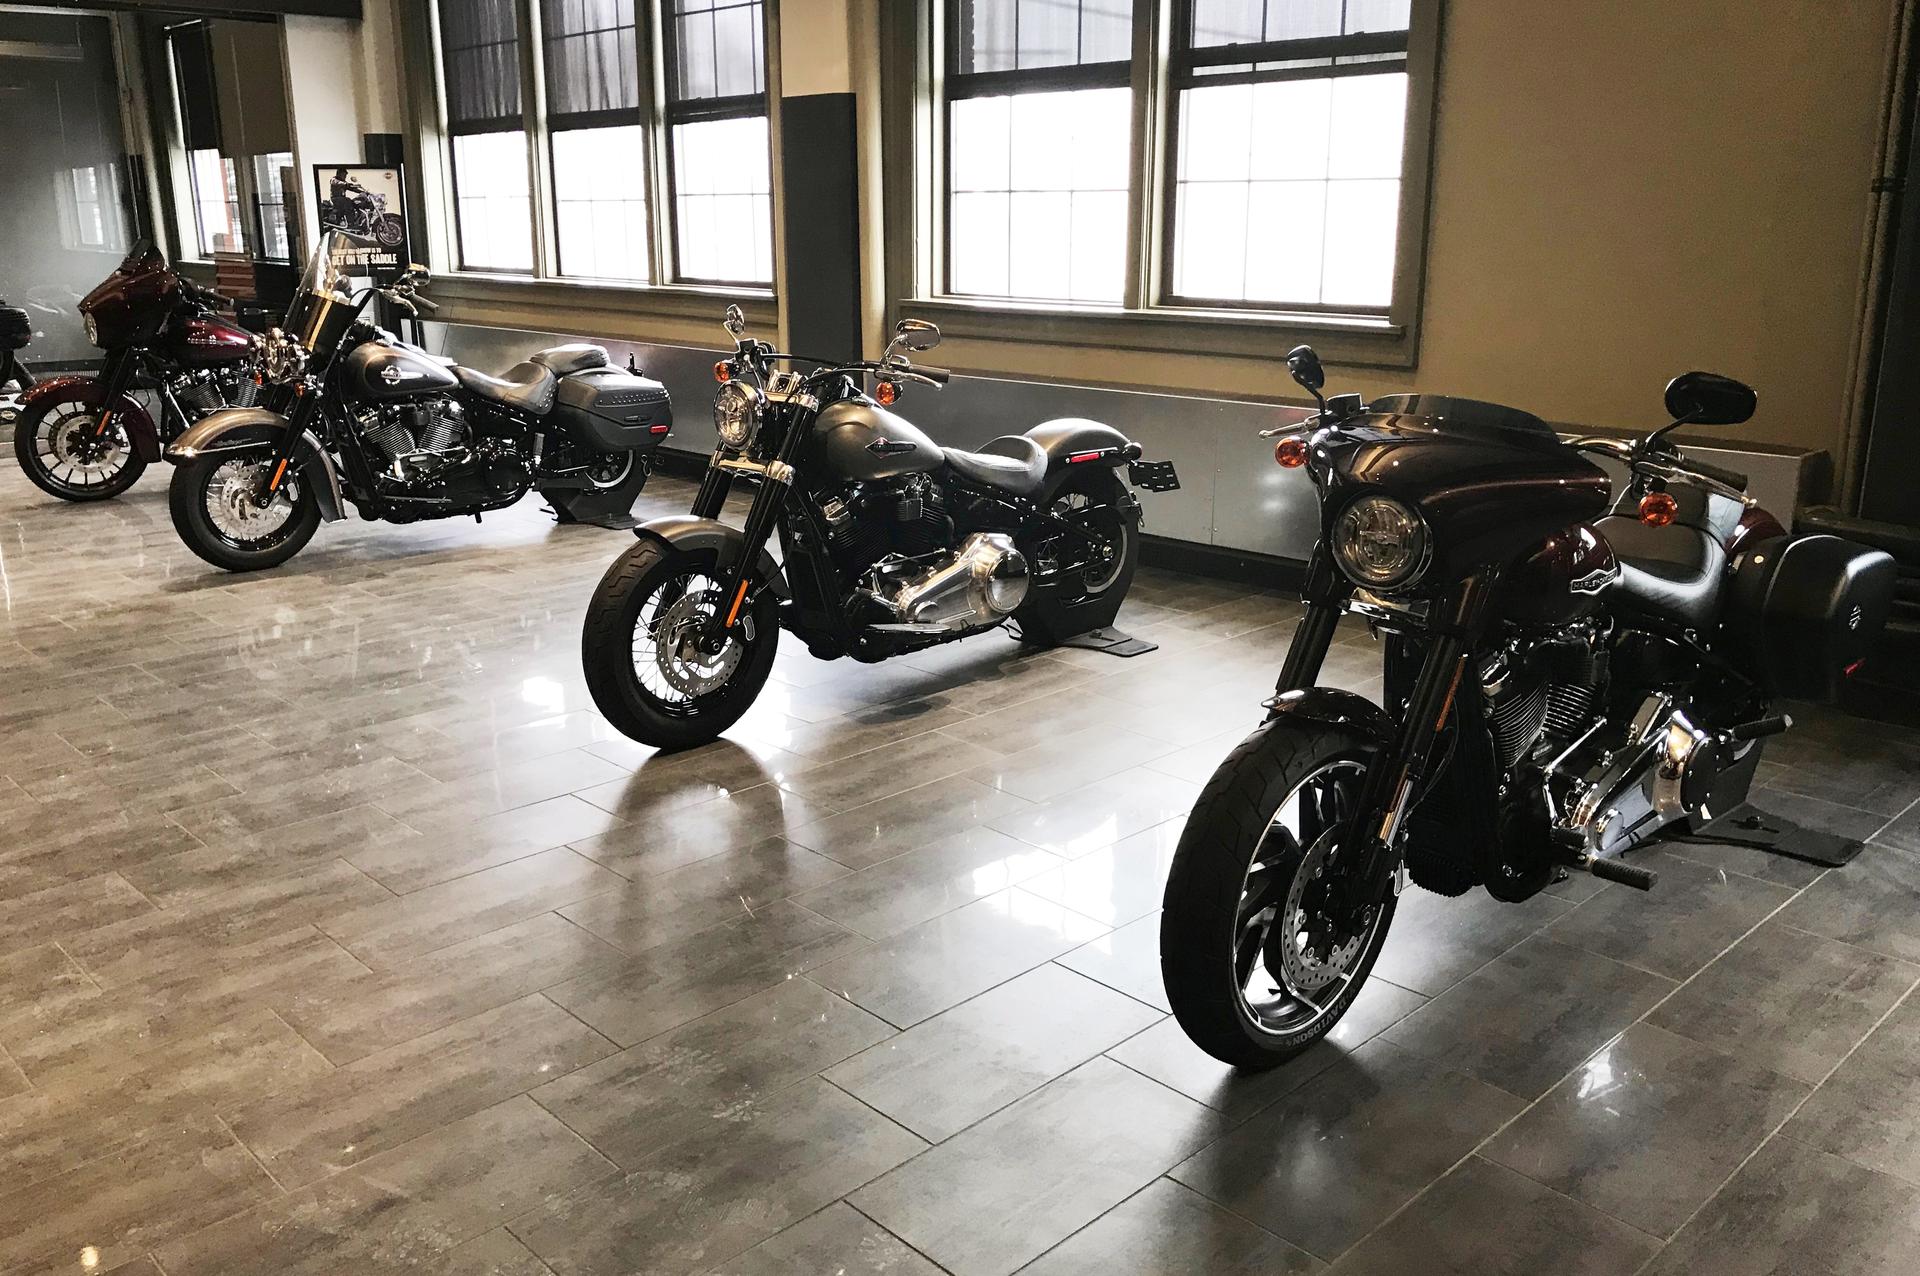 Harley-Davidson motorcycles on display at the company’s headquarters in Milwaukee, Wisconsin. An EPA penalty of $15 million for selling emissions defeat devices was decreased by $3 million under the Trump administration in December 2017.